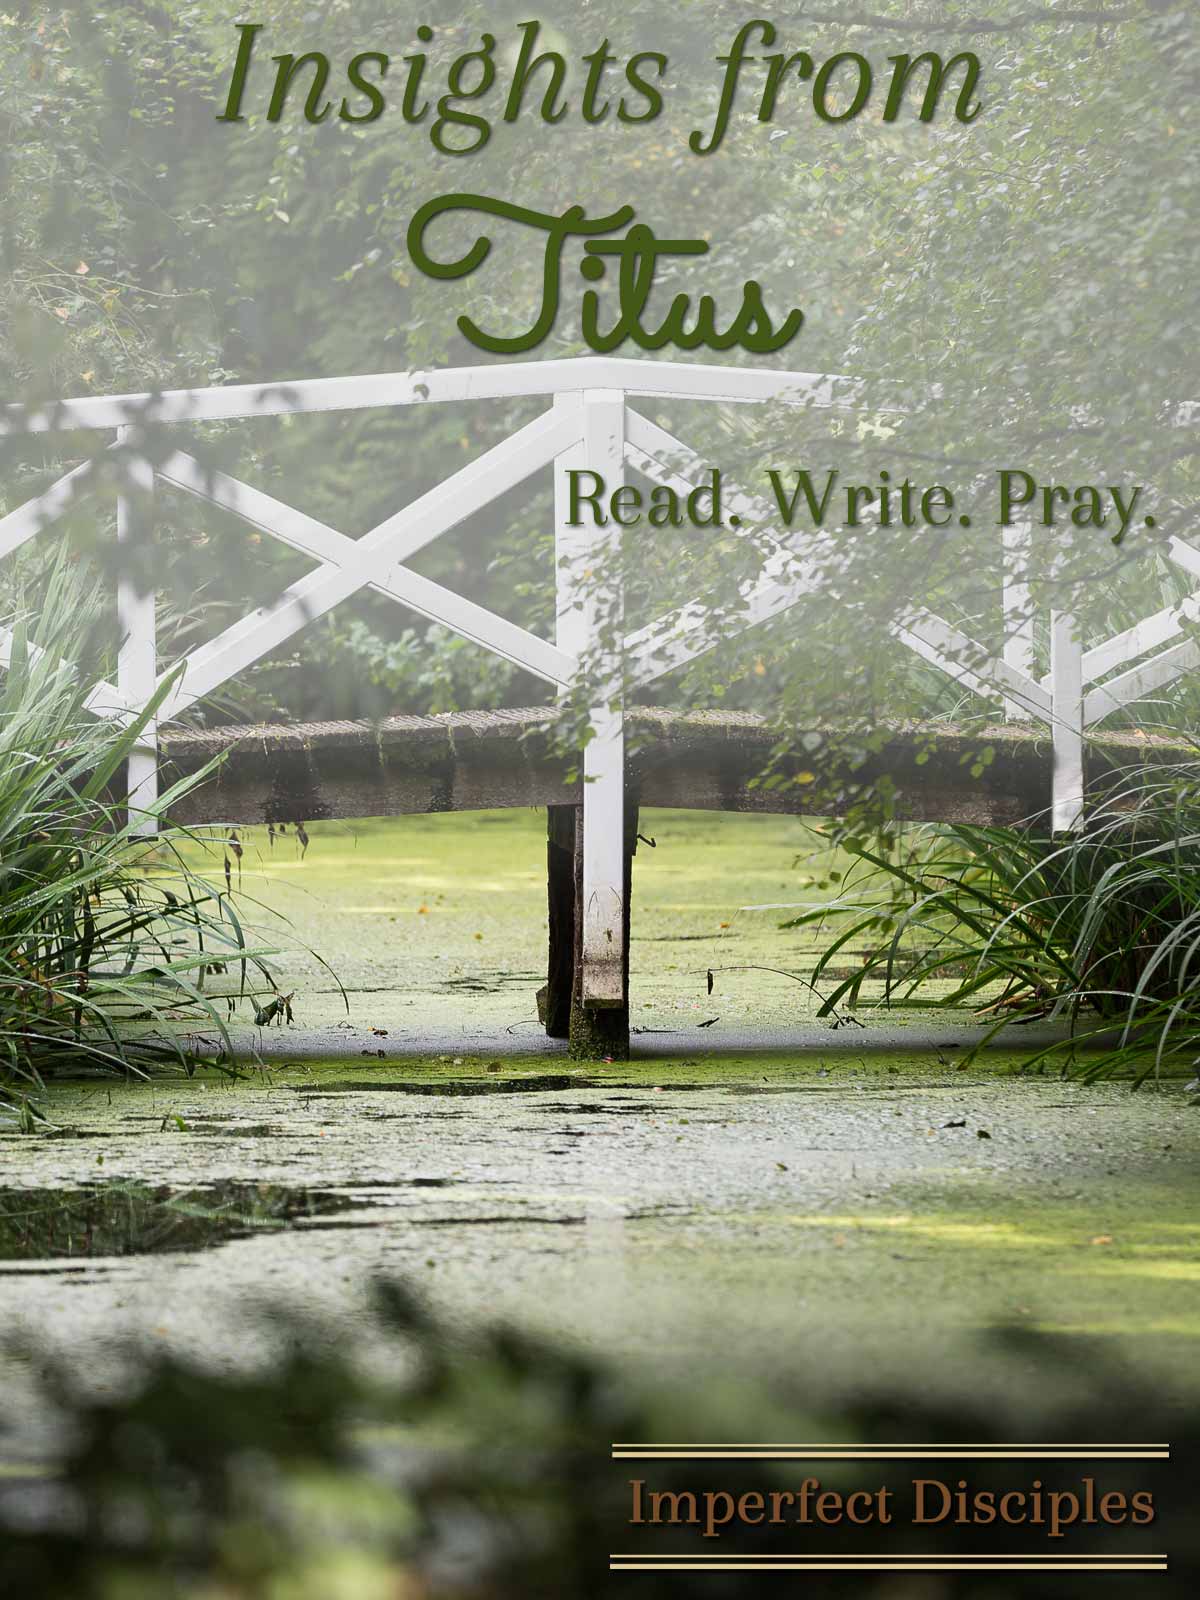 Insights from Titus - Read. Write. Pray.